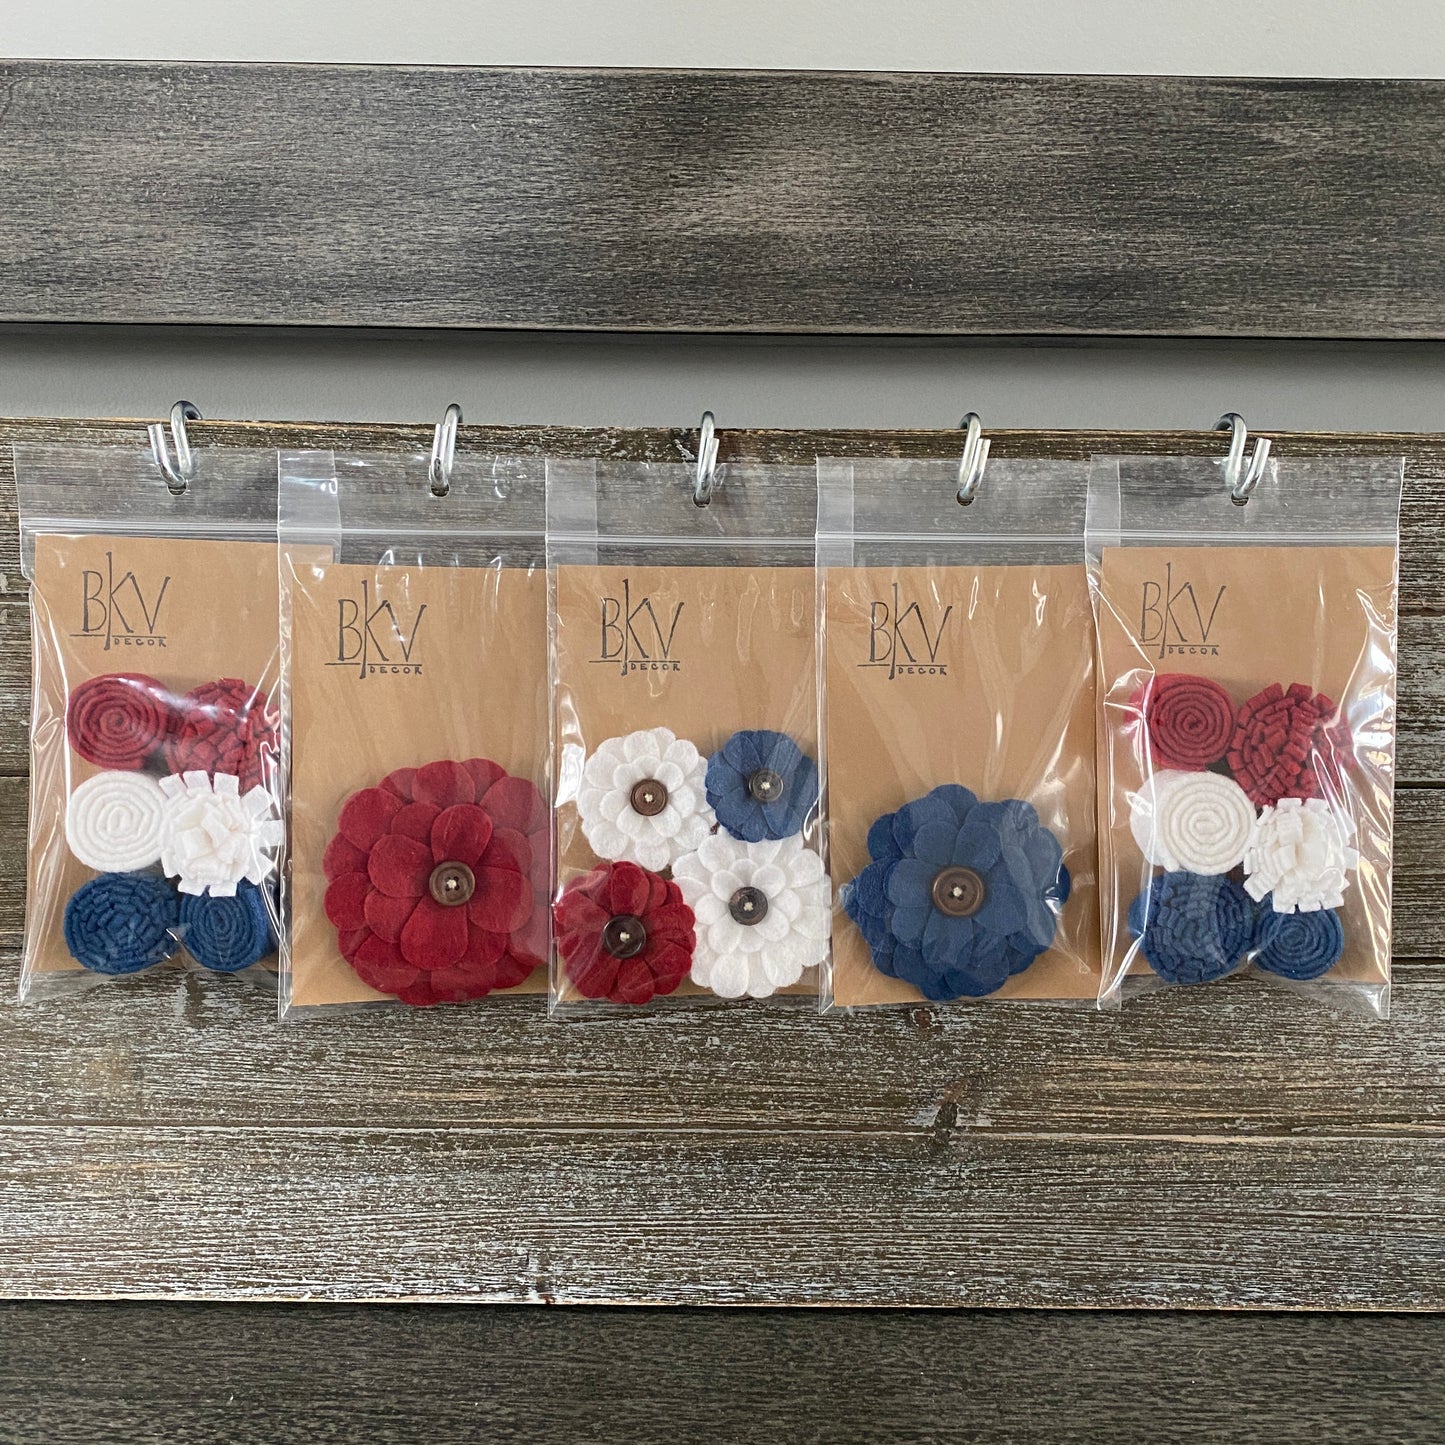 Felt Flower Embellishments for Crafts - Red White and Blue Flowers - Variety Pack